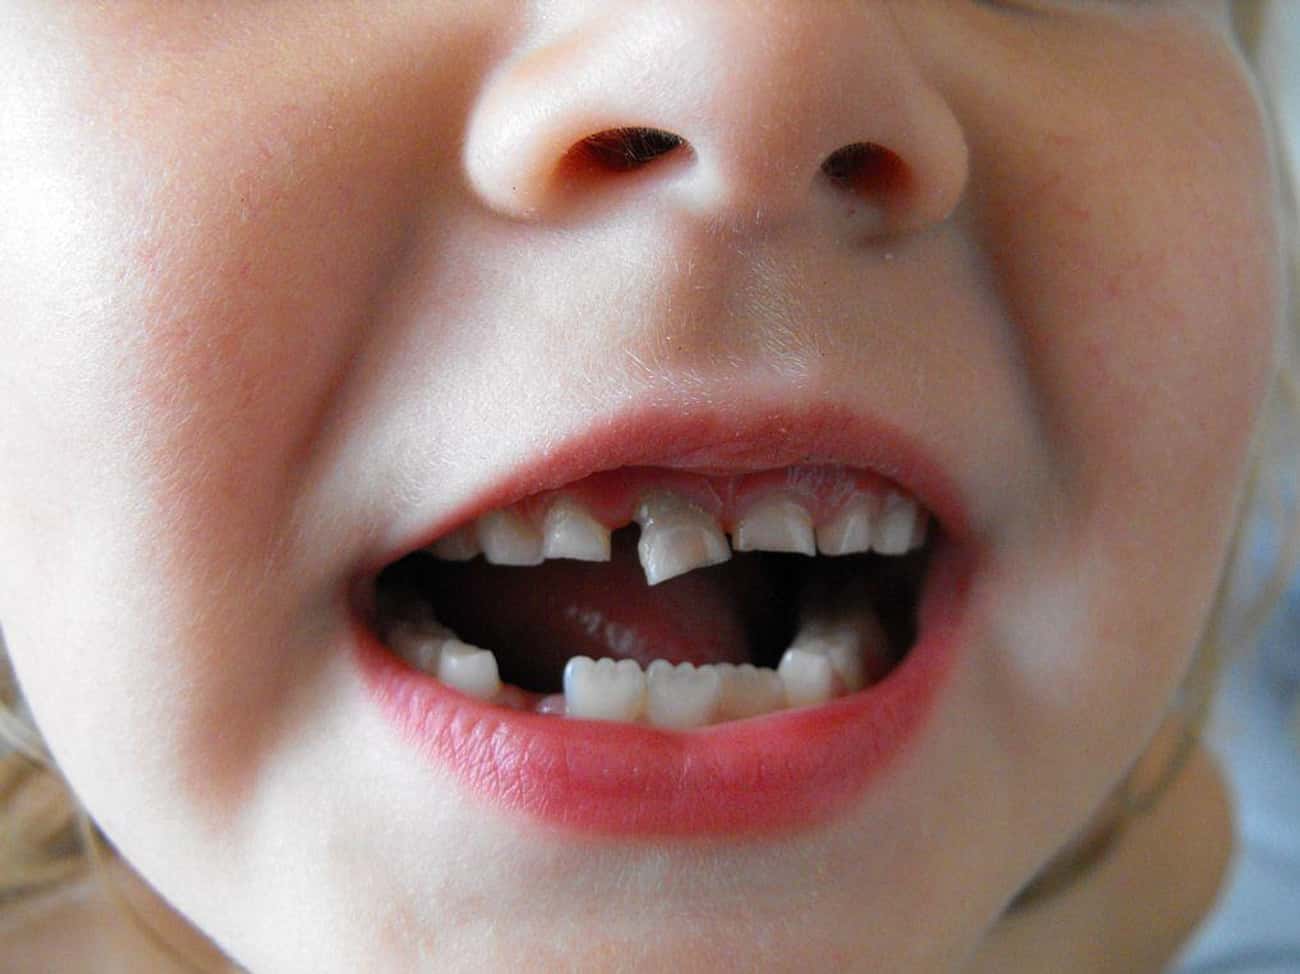 Dreams About Teeth Falling Out Suggest Change